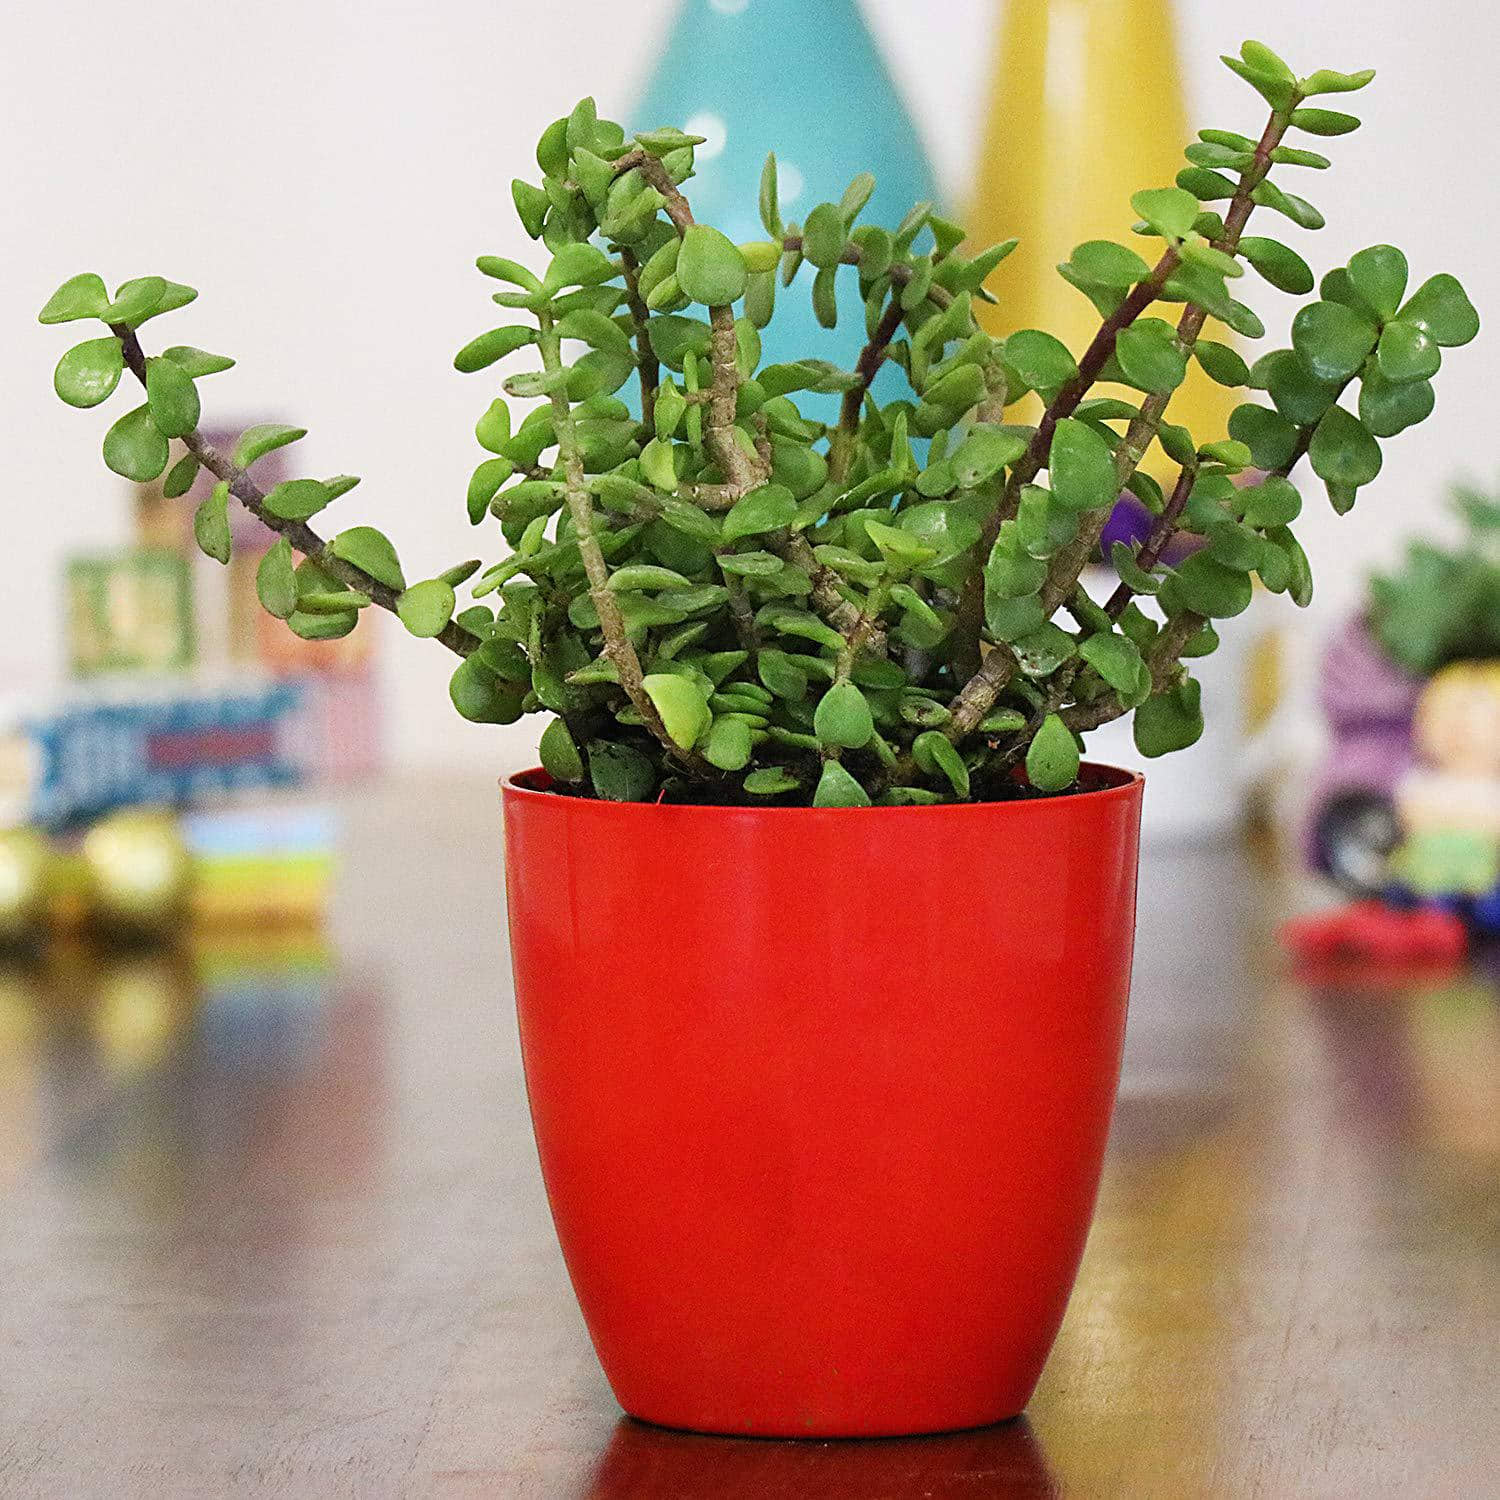 Jade Plant Care Guide: How to Care for a Jade Plant | The Old Farmer's  Almanac